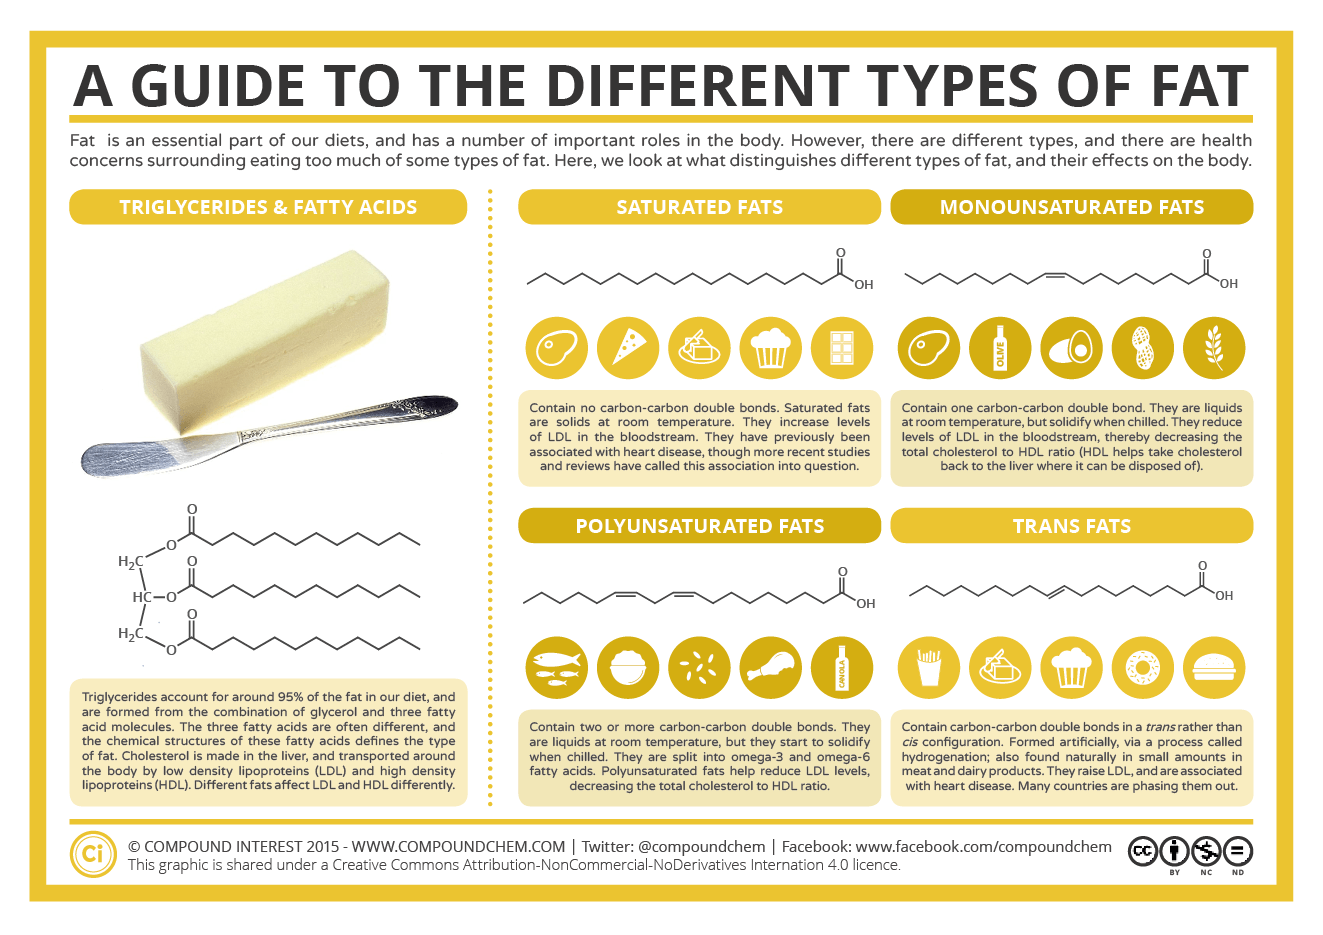 A Guide to the Different Types of Fat